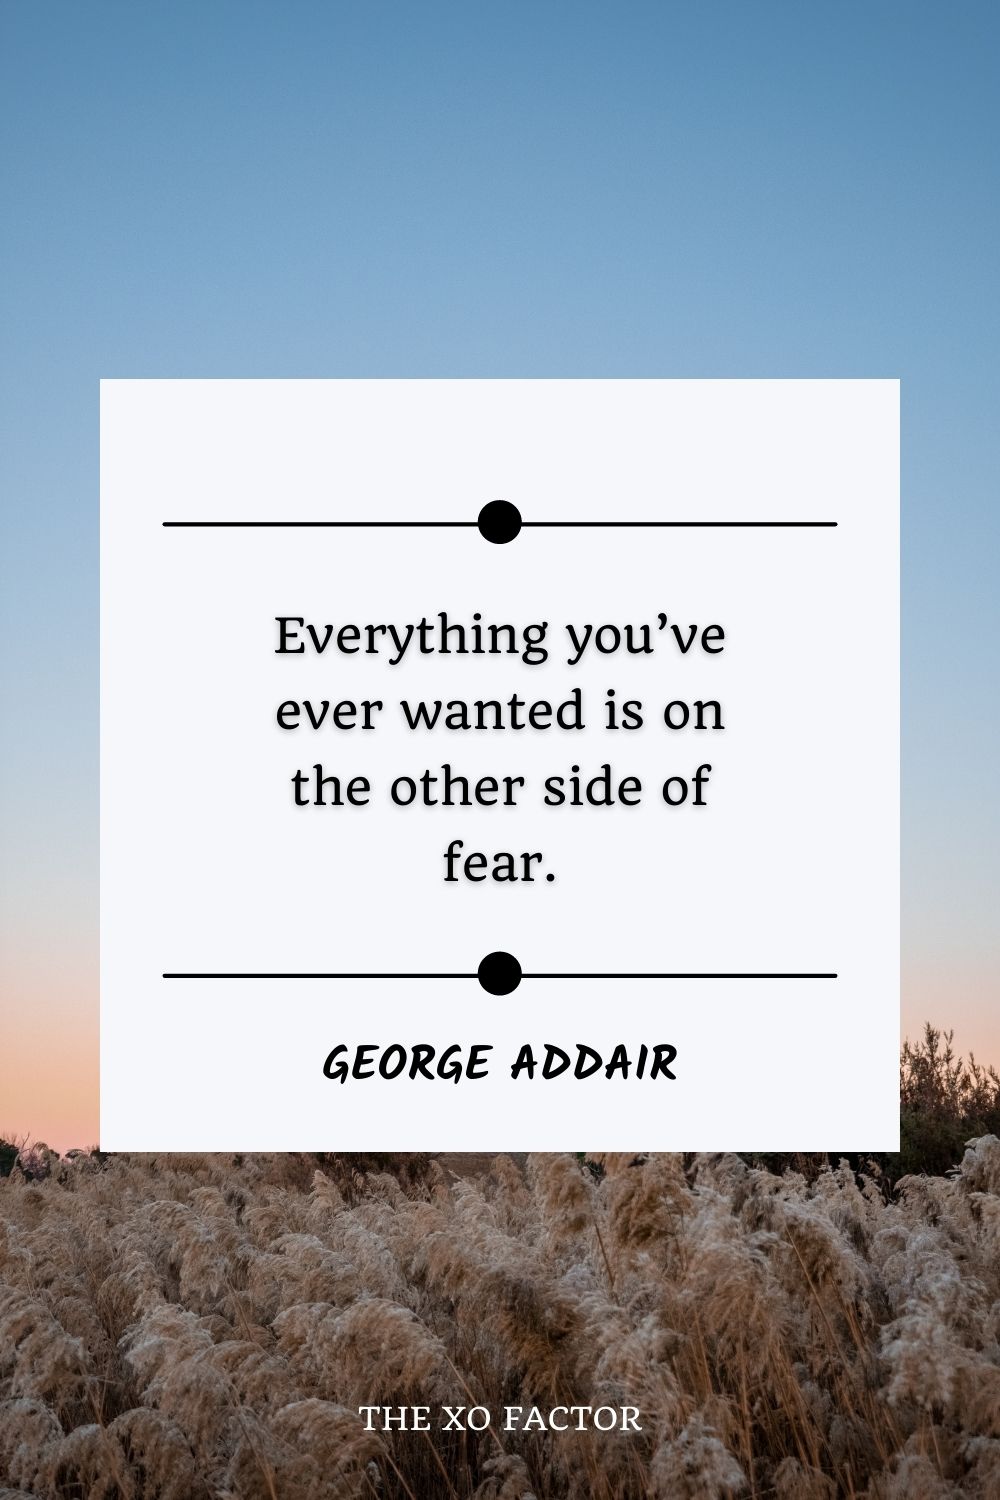 Everything you’ve ever wanted is on the other side of fear.”- George Addair